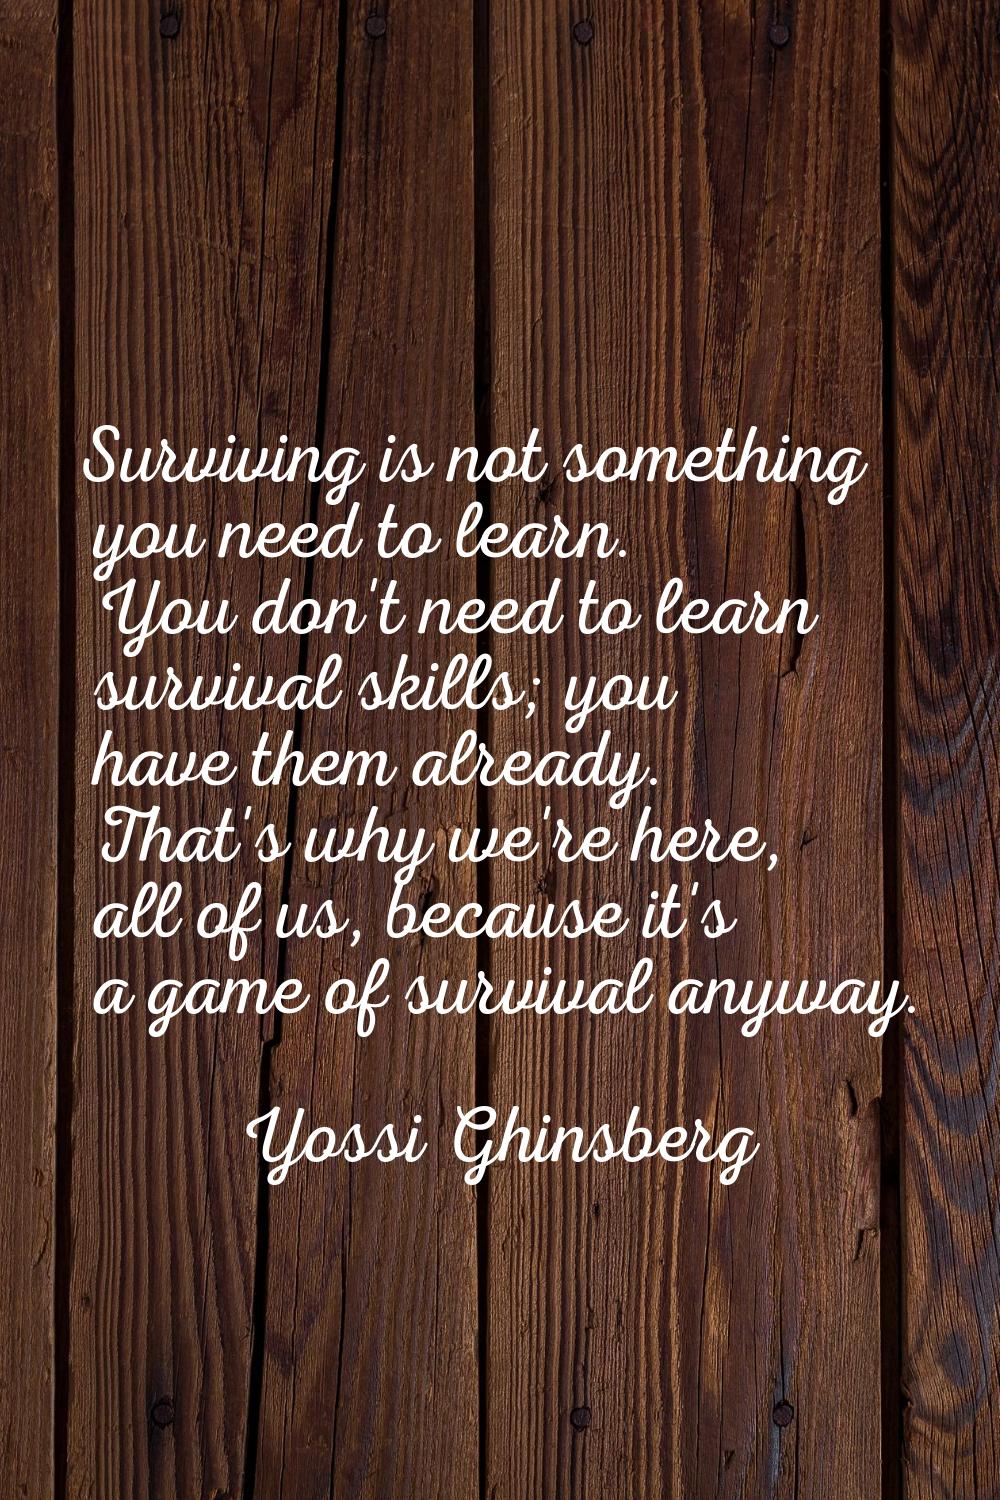 Surviving is not something you need to learn. You don't need to learn survival skills; you have the